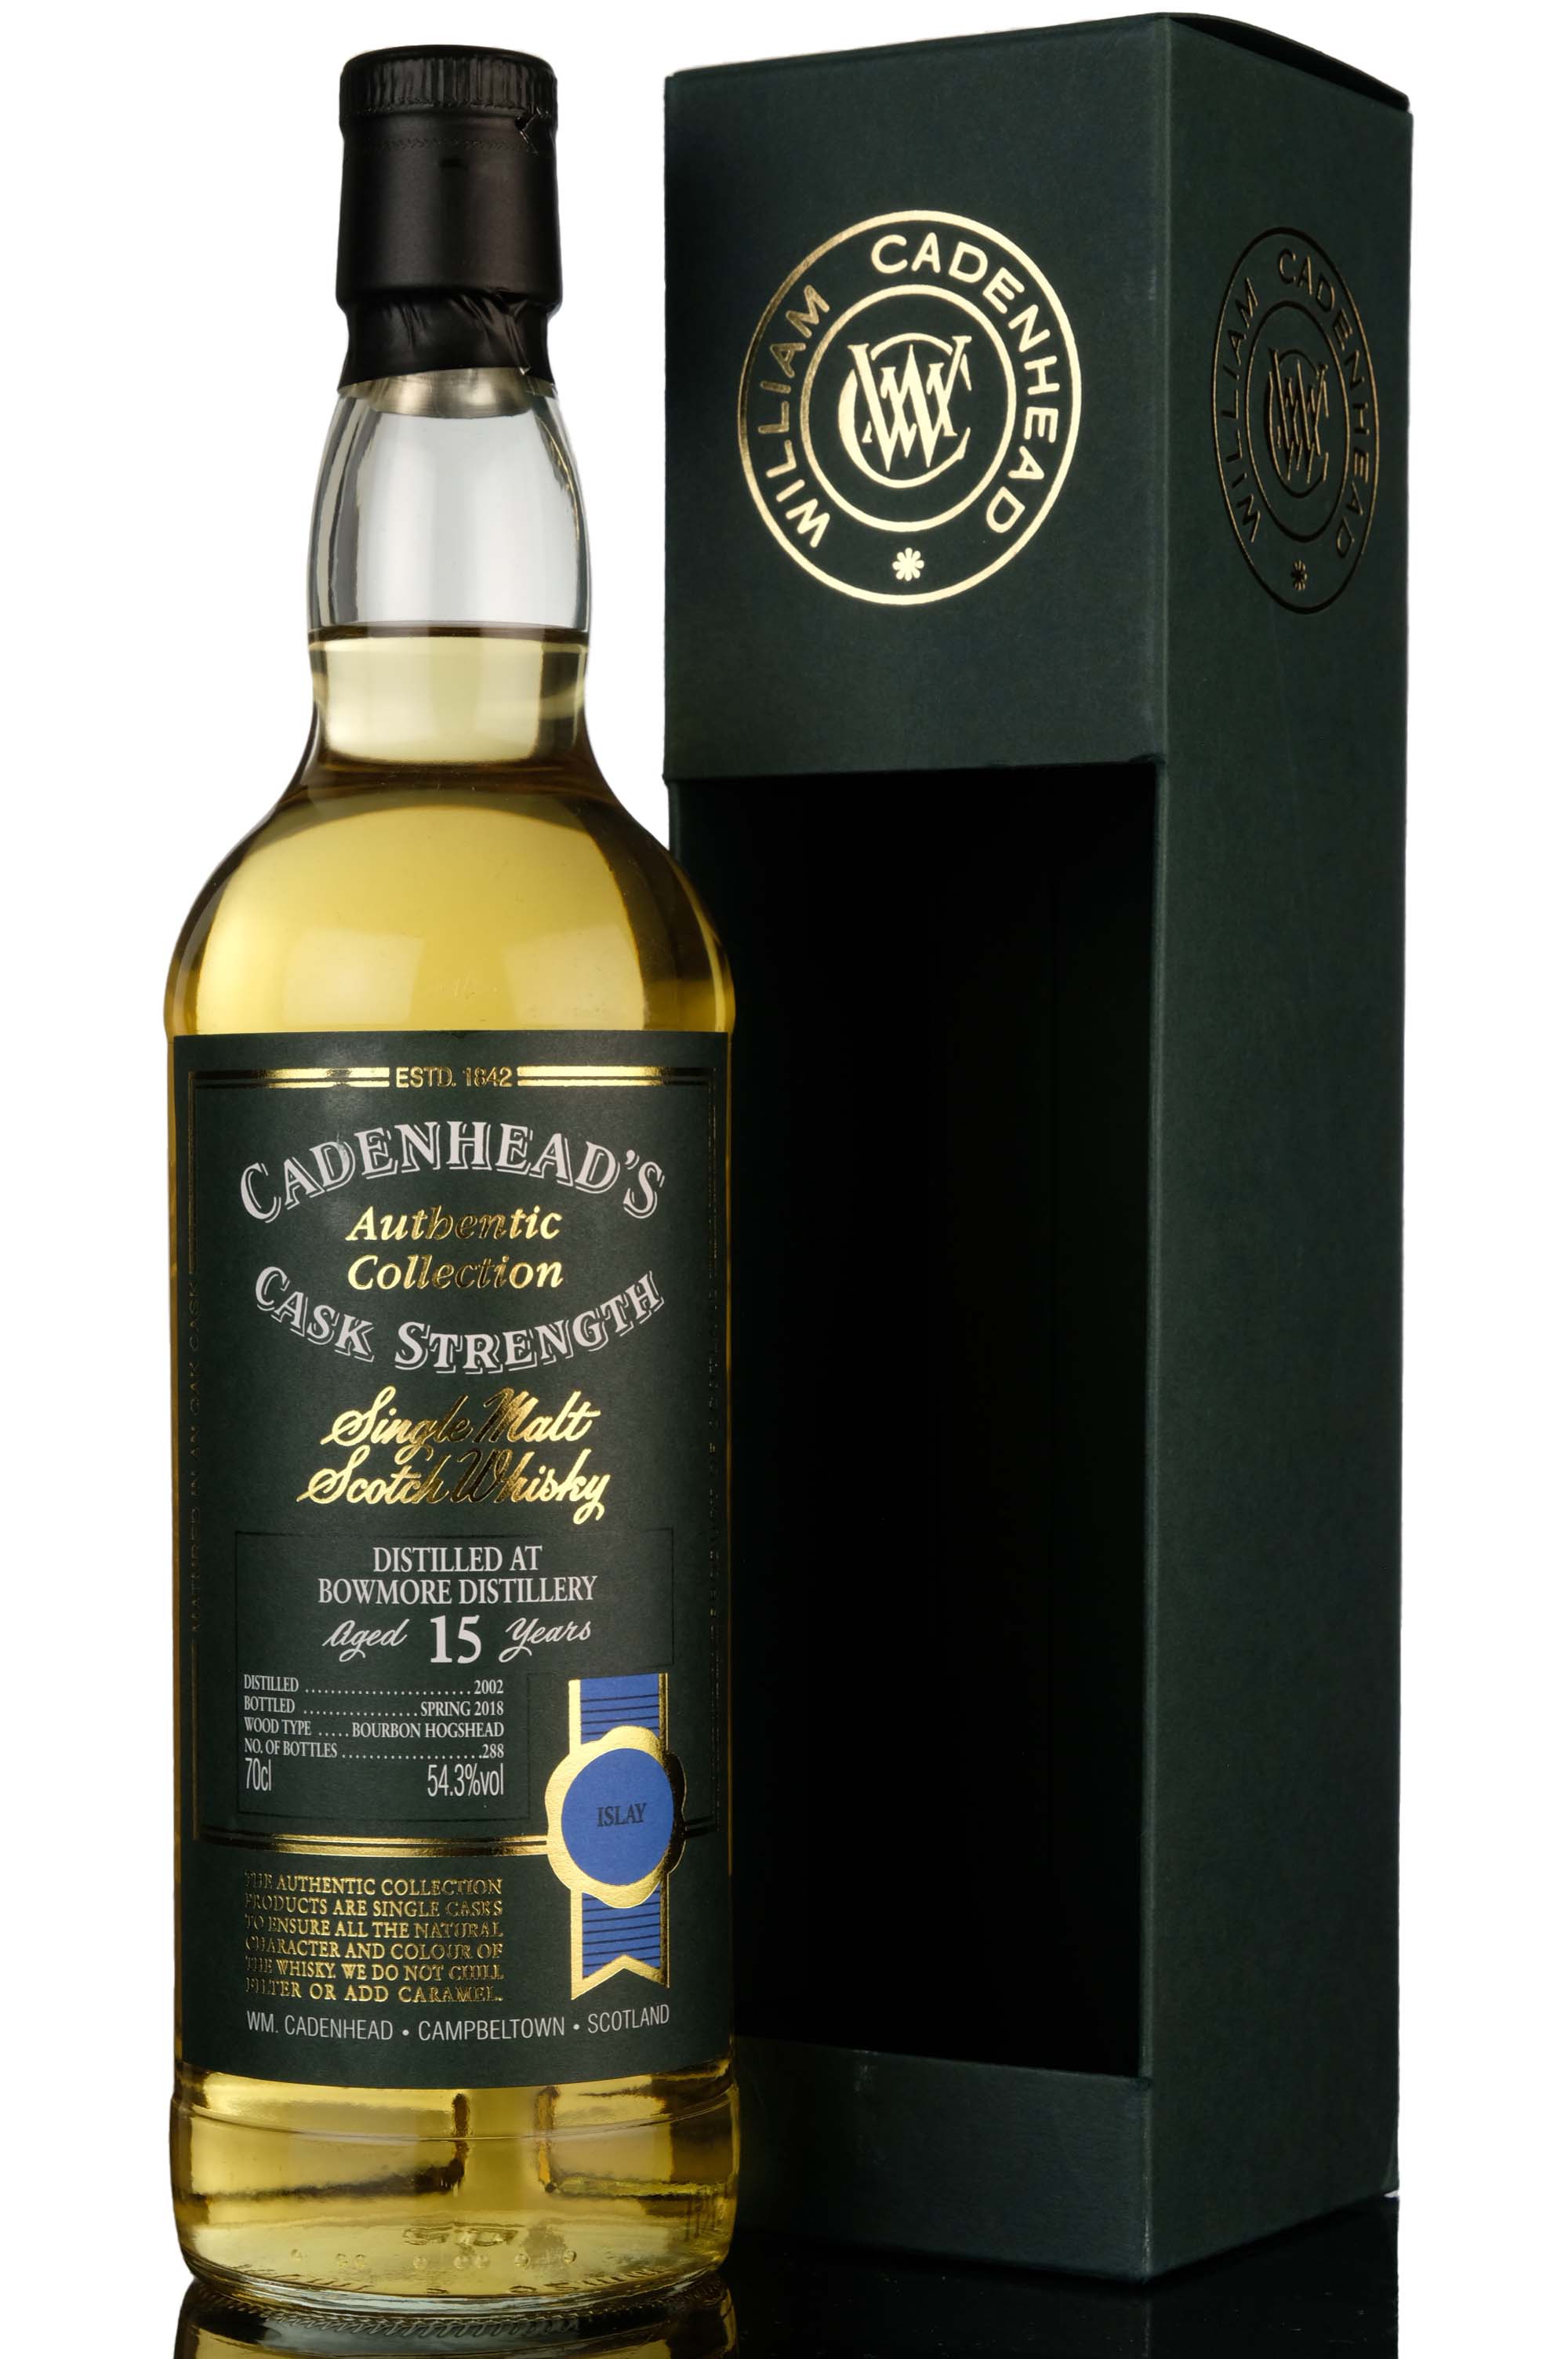 Bowmore 2002-2018 - 15 Year Old - Cadenheads Authentic Collection - Single Cask